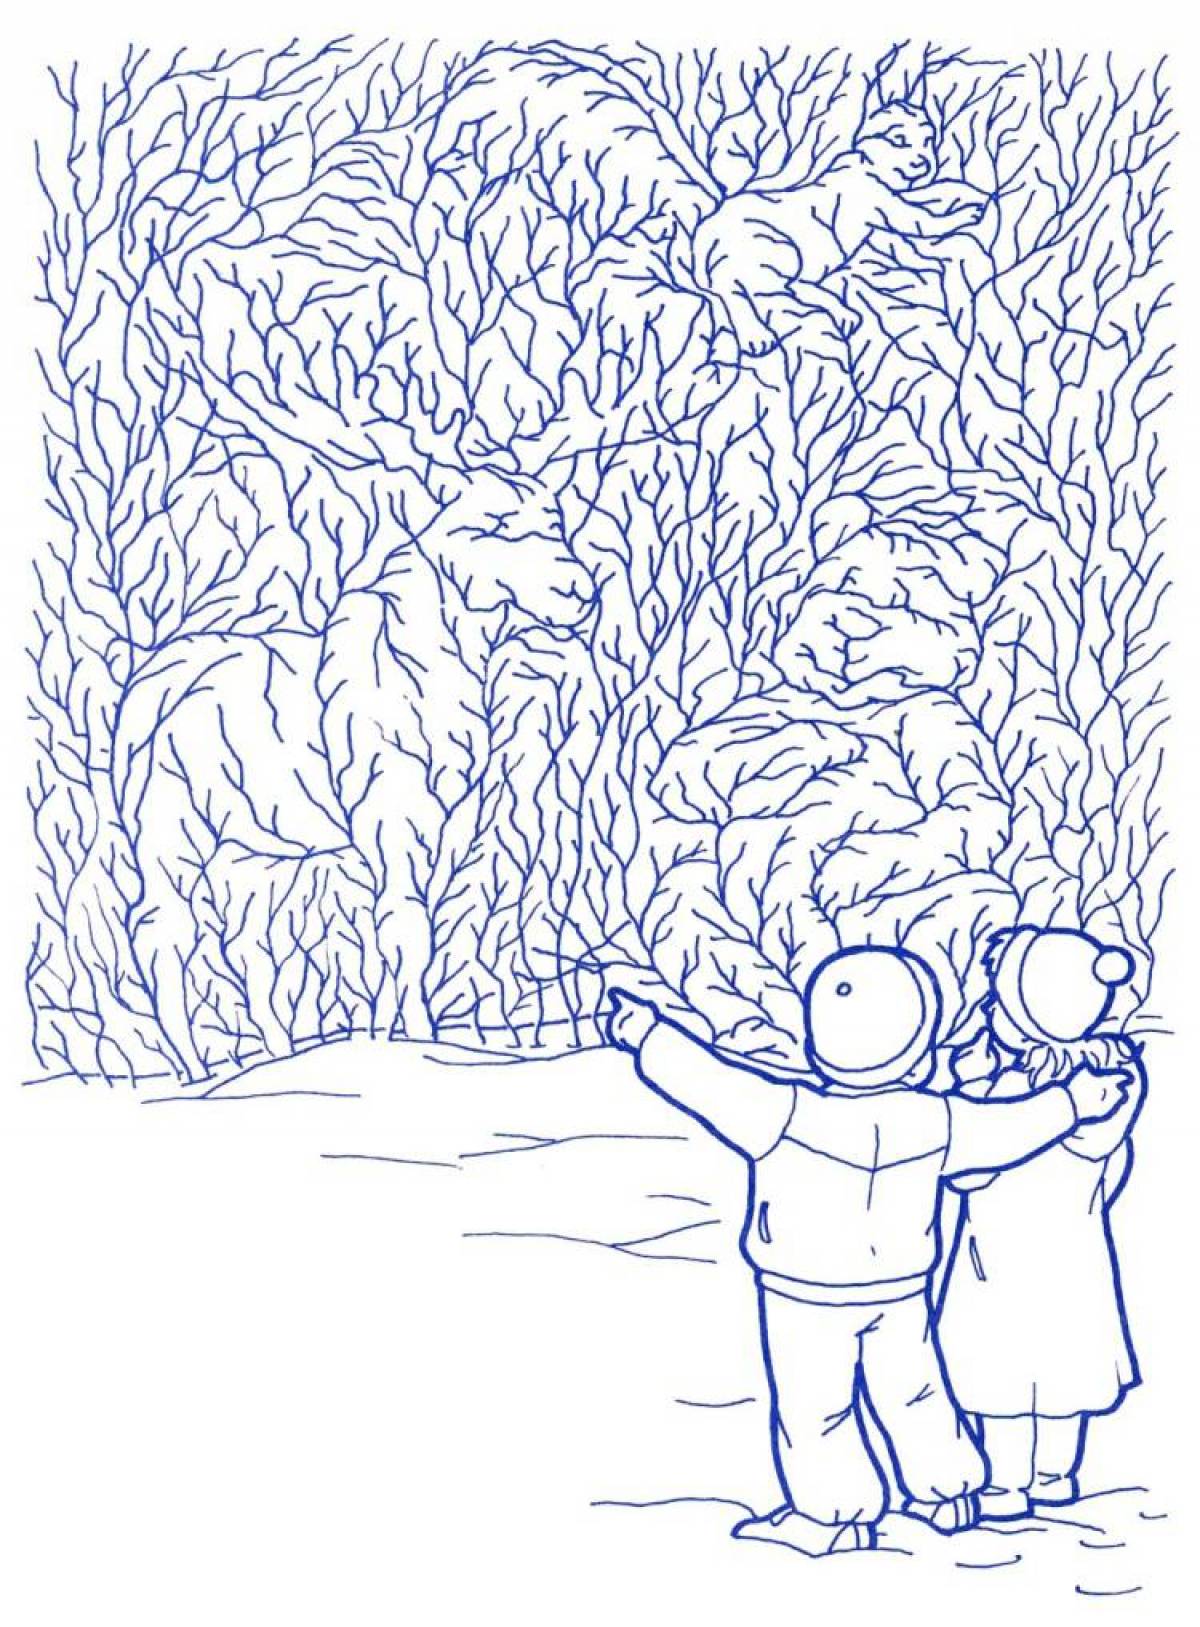 Playful winter forest coloring page for kids